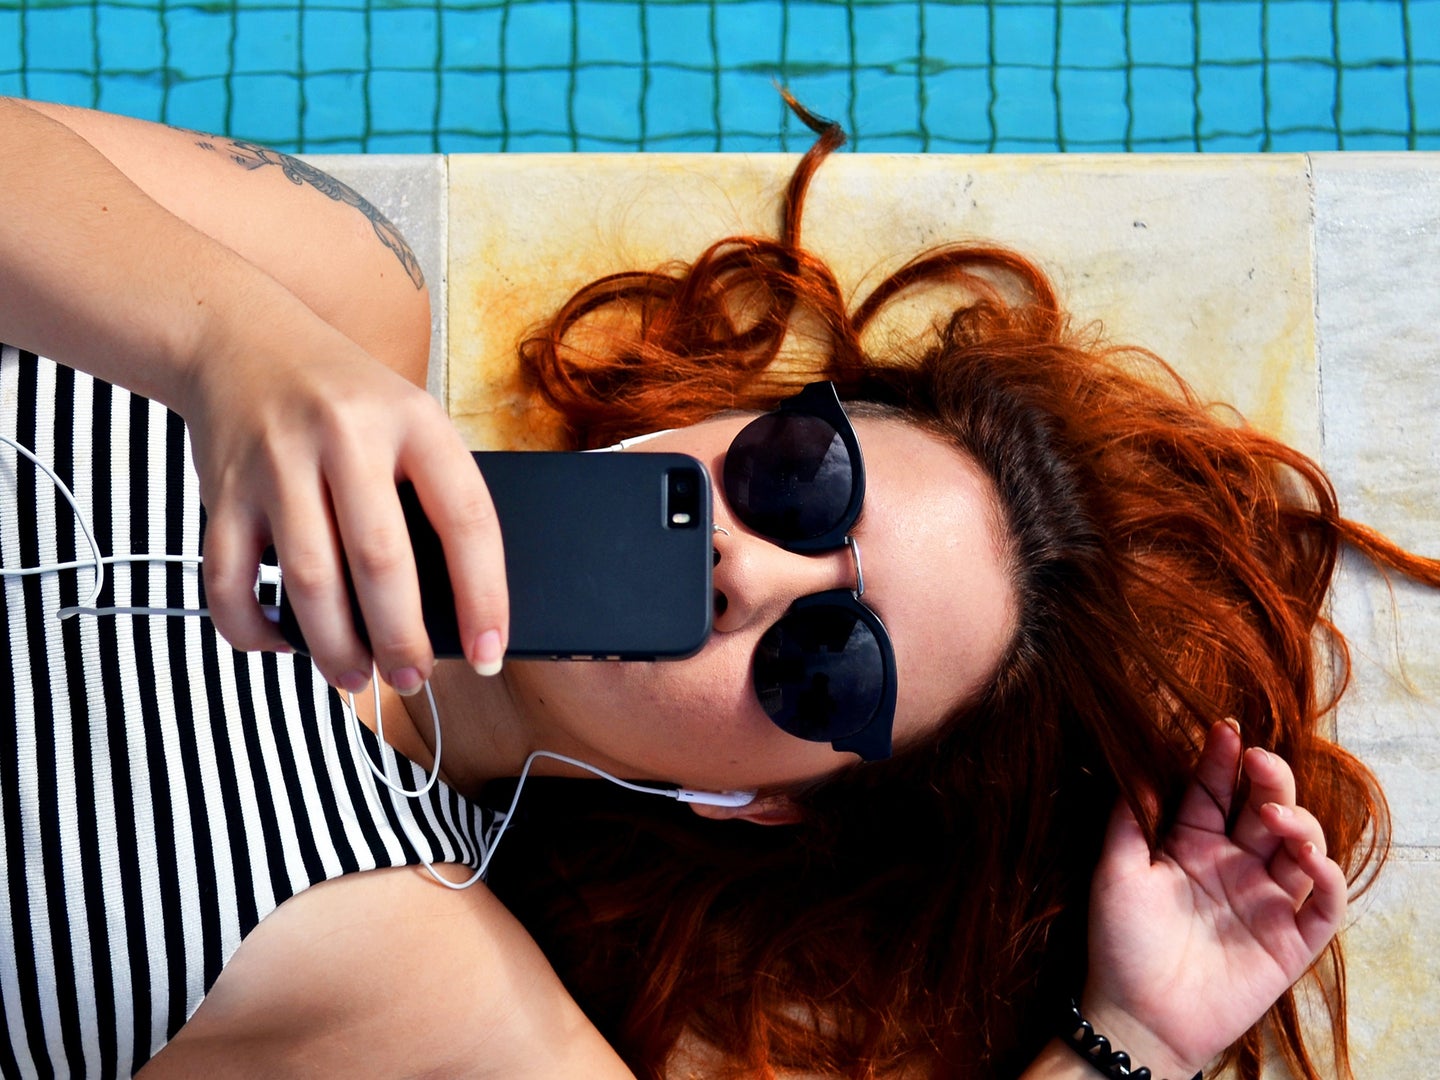 Person looking at phone by the pool